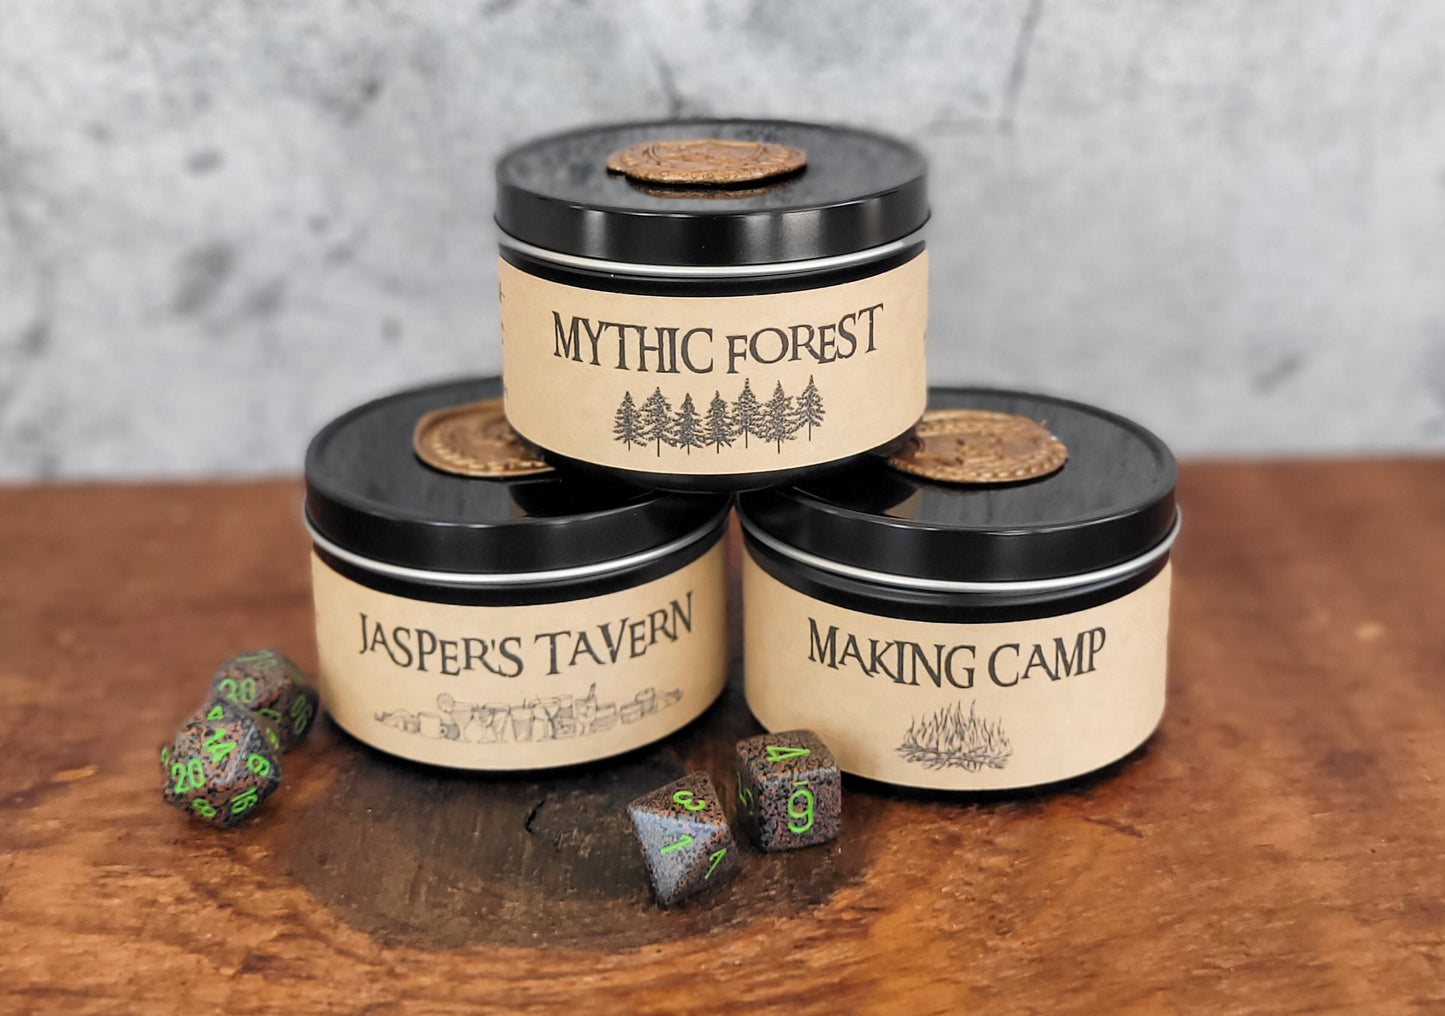 Mythic Forest